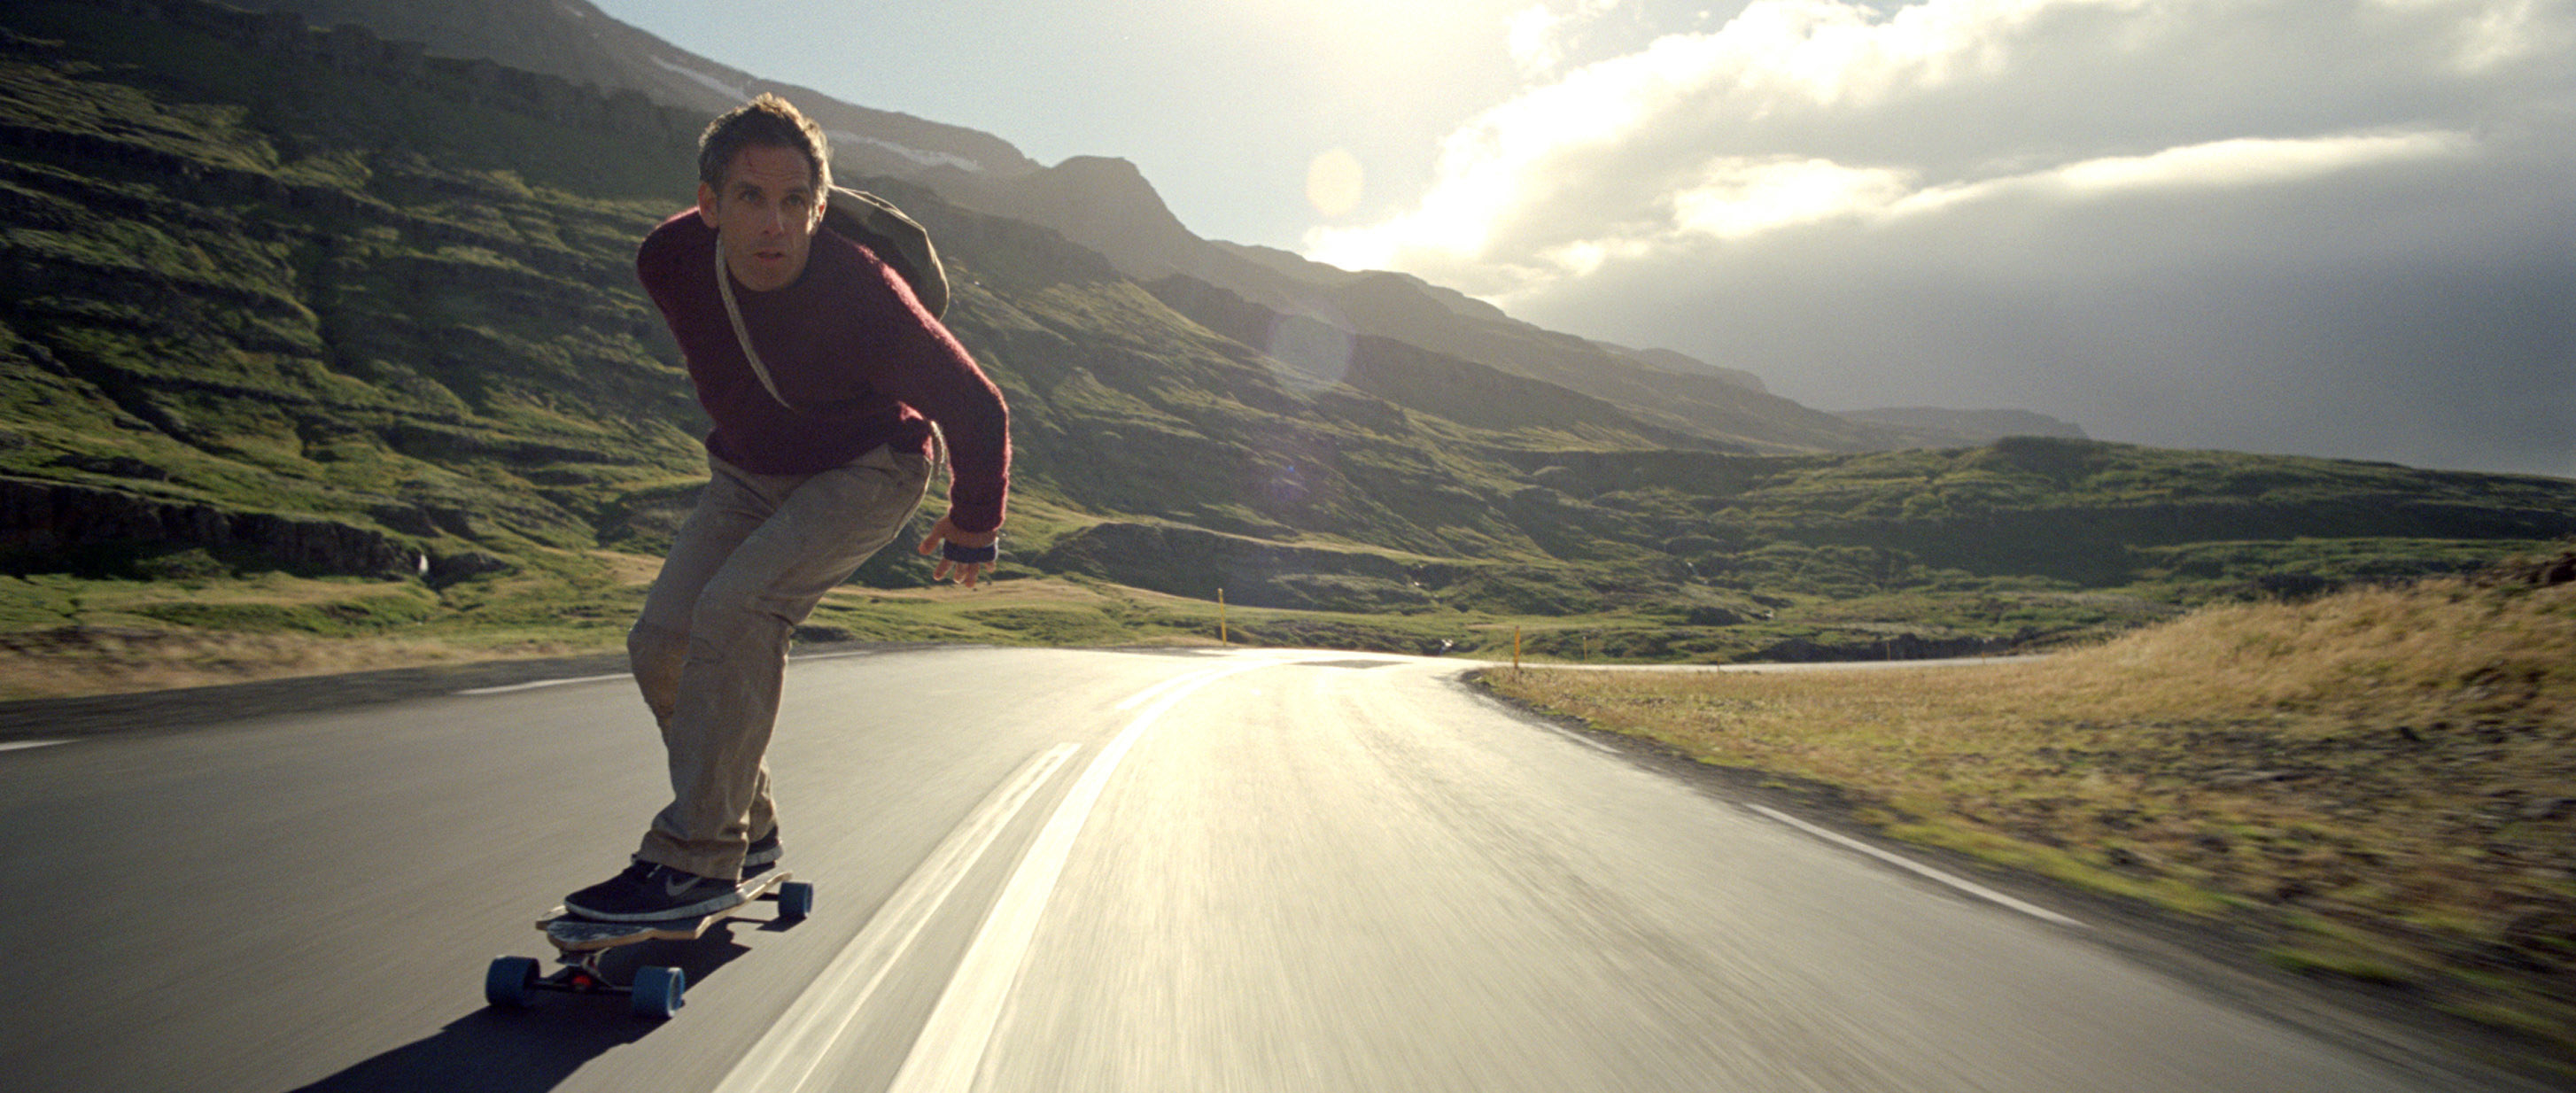 Ben Stiller riding a skateboard really fast down a quiet road in the countryside